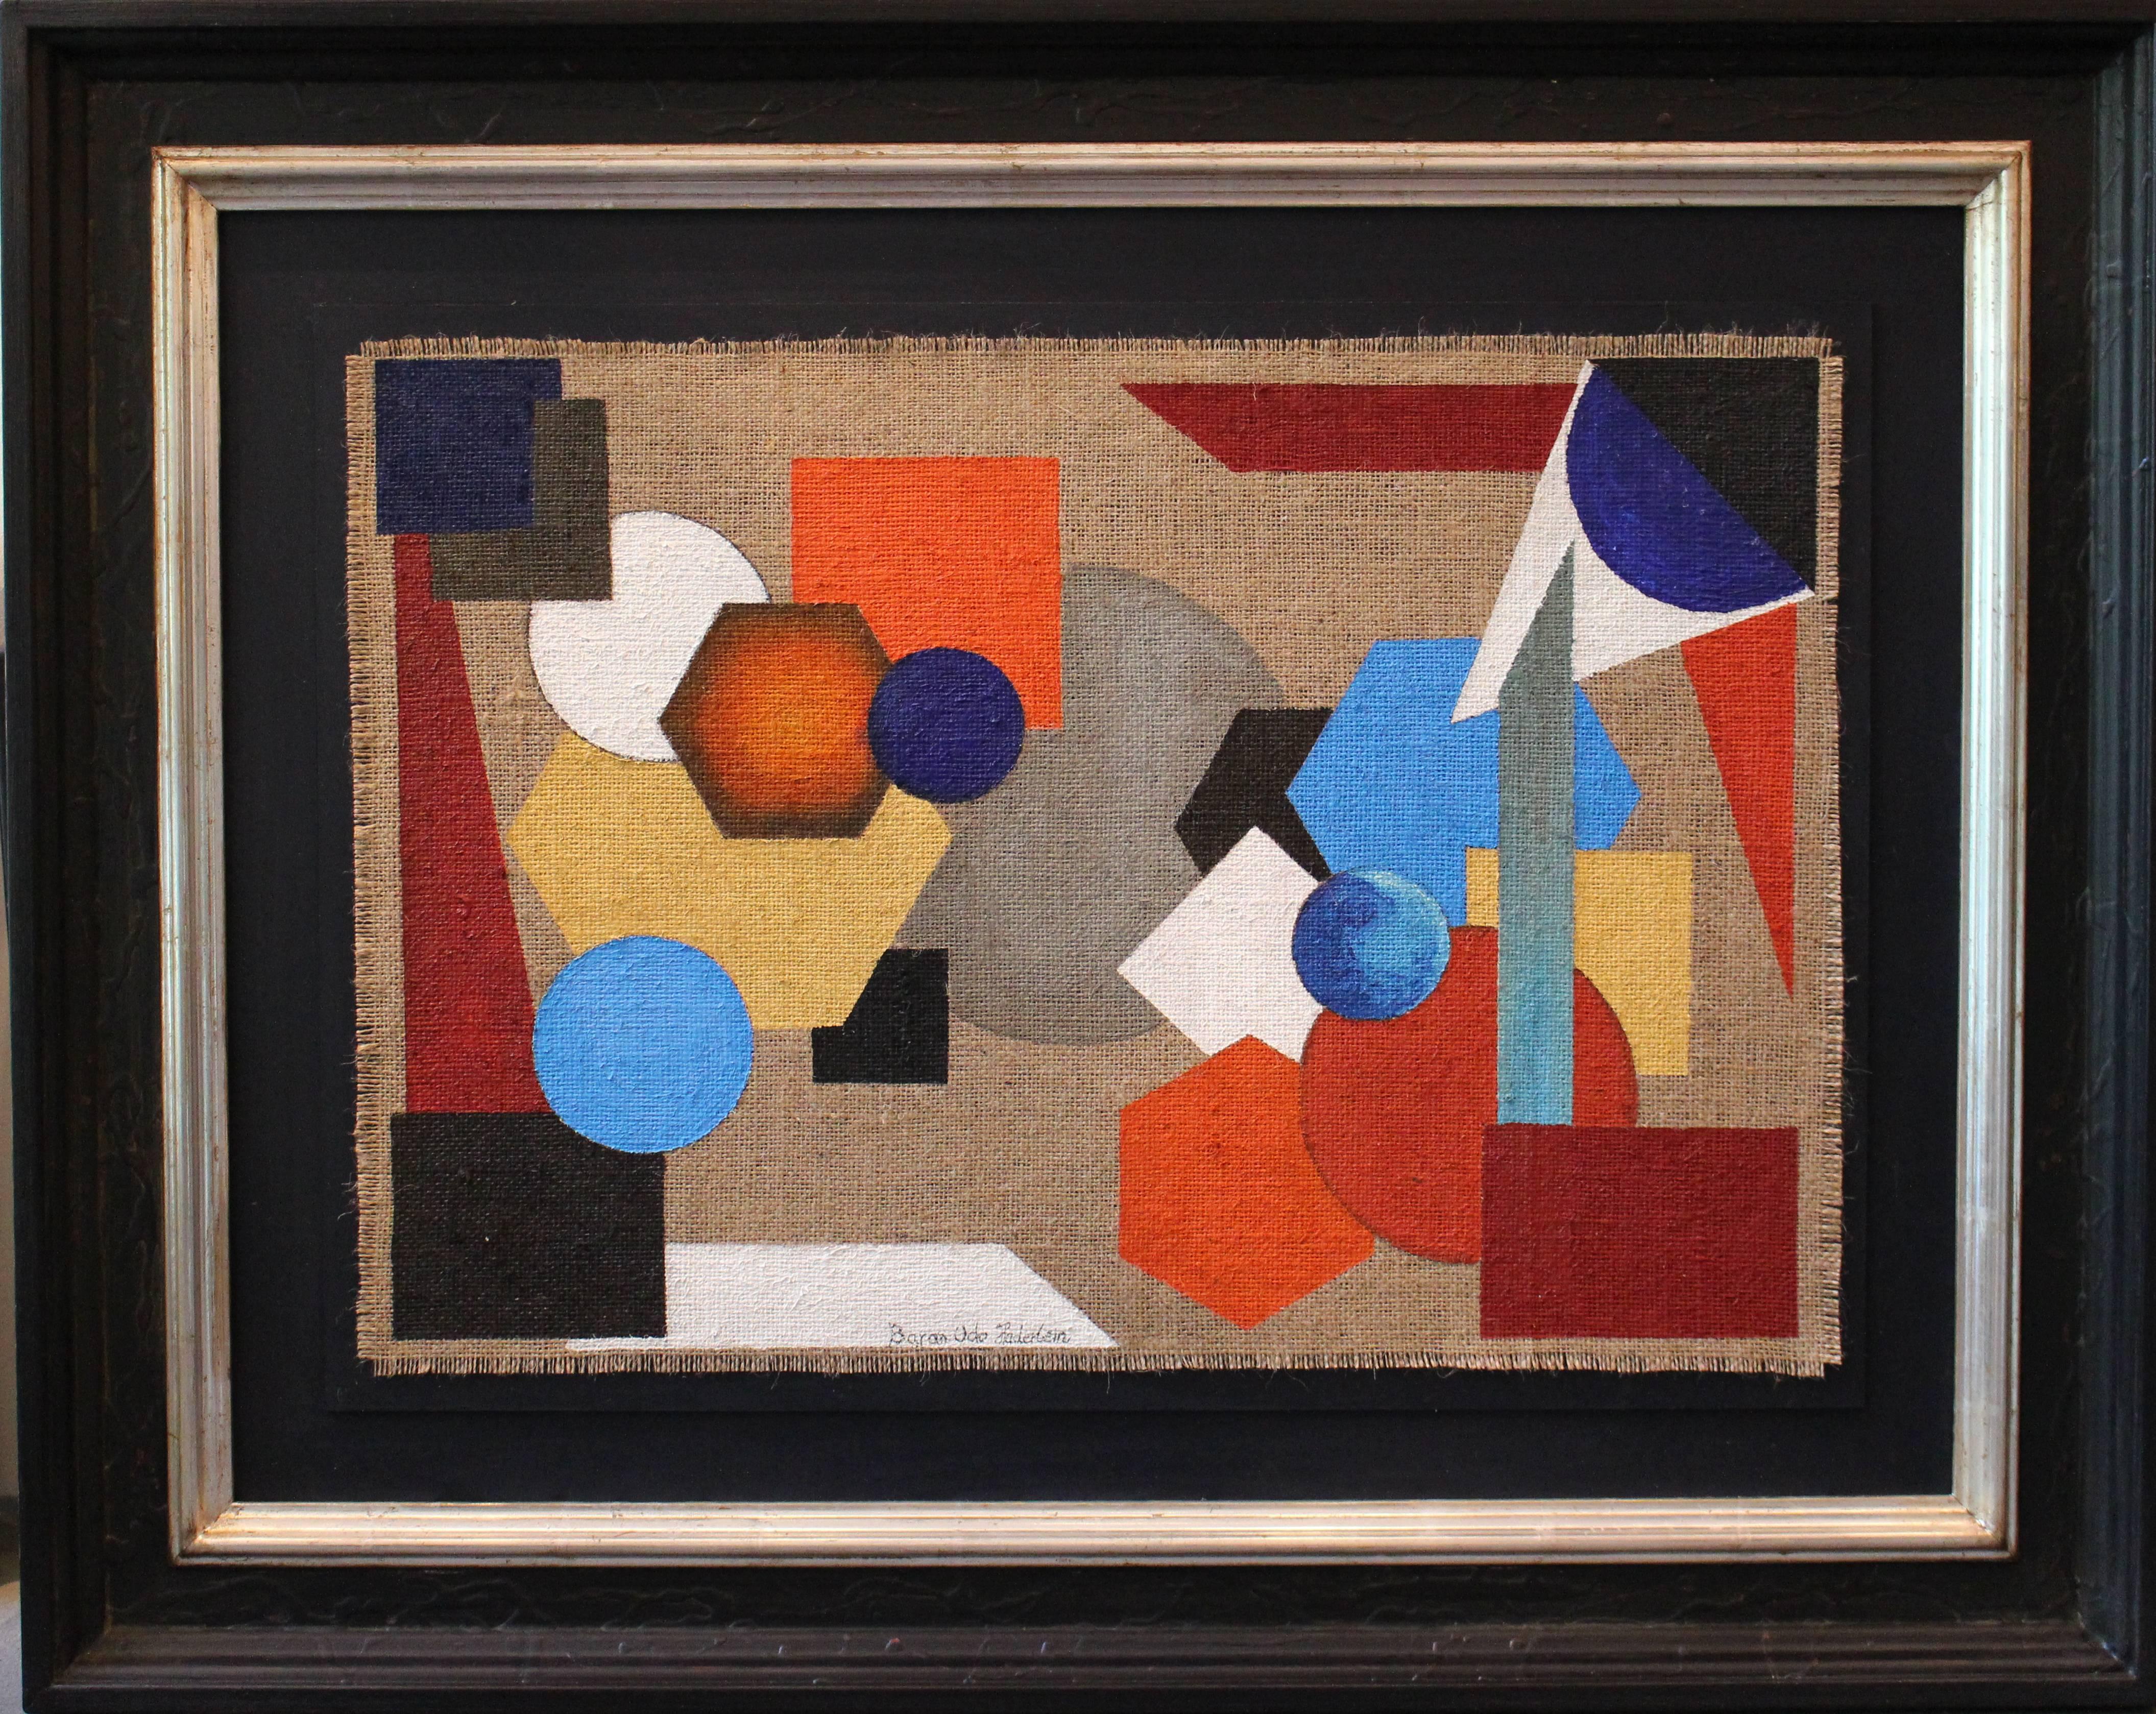 This is a very fine example of abstract art done on jute with acrylic paint.
Signed lower center: Baran Udo Haderlein. Signed, inscribed and dated verso. Framed. It comes directly from the studio of the artist. 
Dimensions are: 18.11 x 25.98 in ( 48